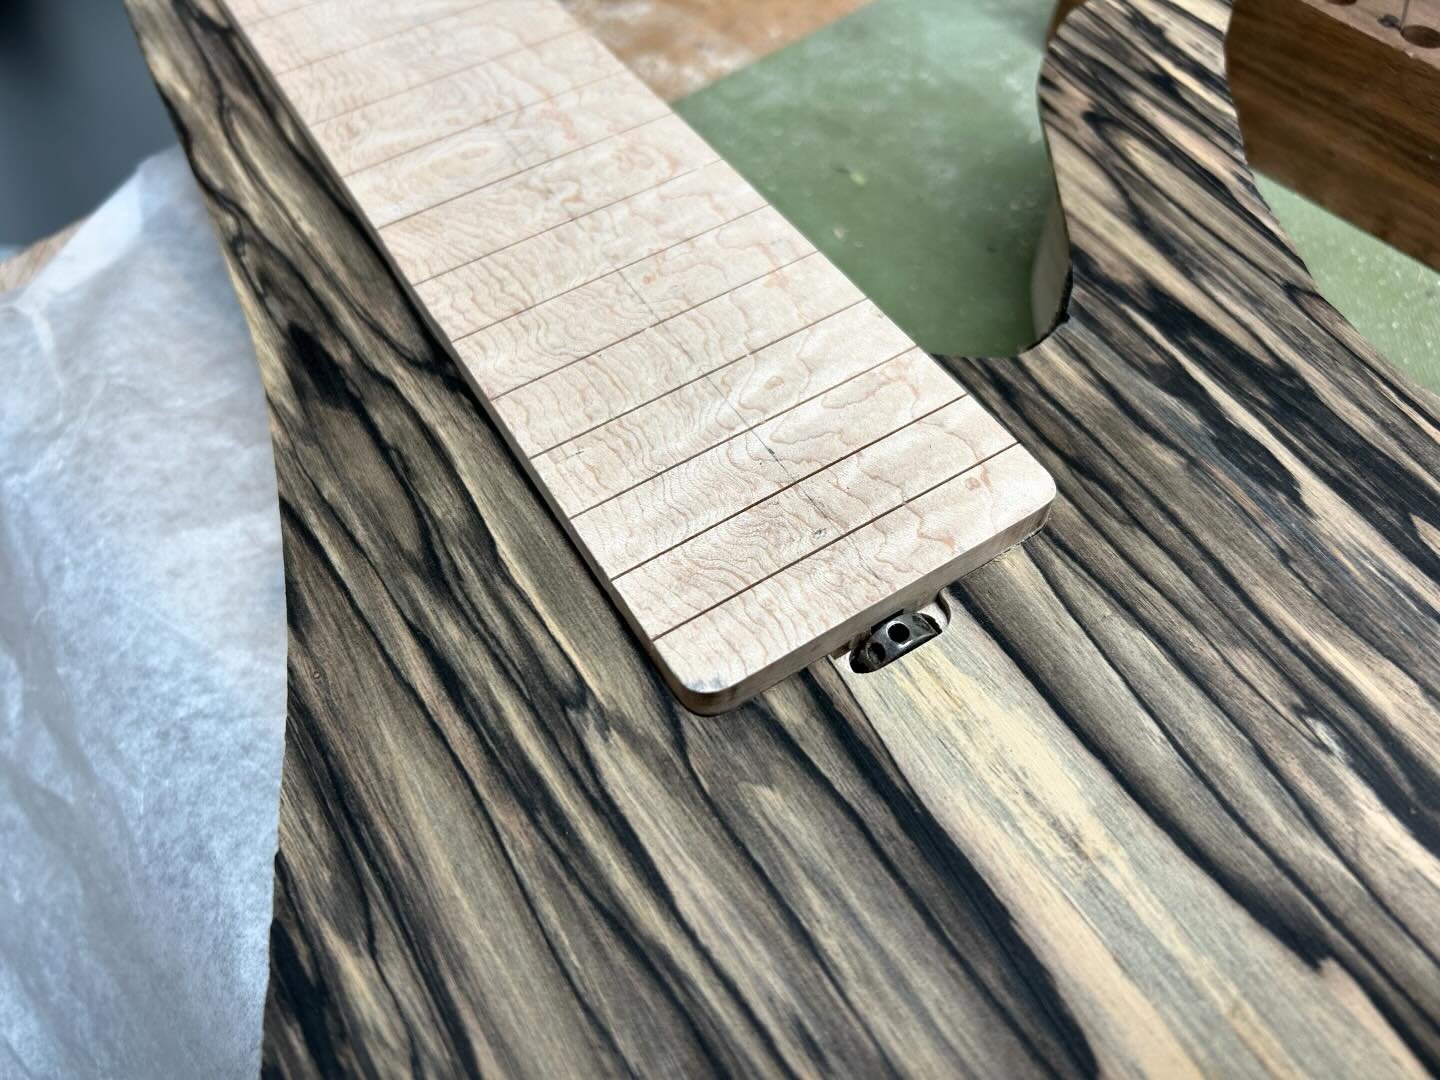 More progress on Dveed&rsquo;s custom 12-string bass. The Pale Moon Ebony top is fit to the body. I&rsquo;ll make as much more progress as I can while awaiting the custom hardware #stgermaineguitars #12stringbass #custombass #boutiquebass #handmadein